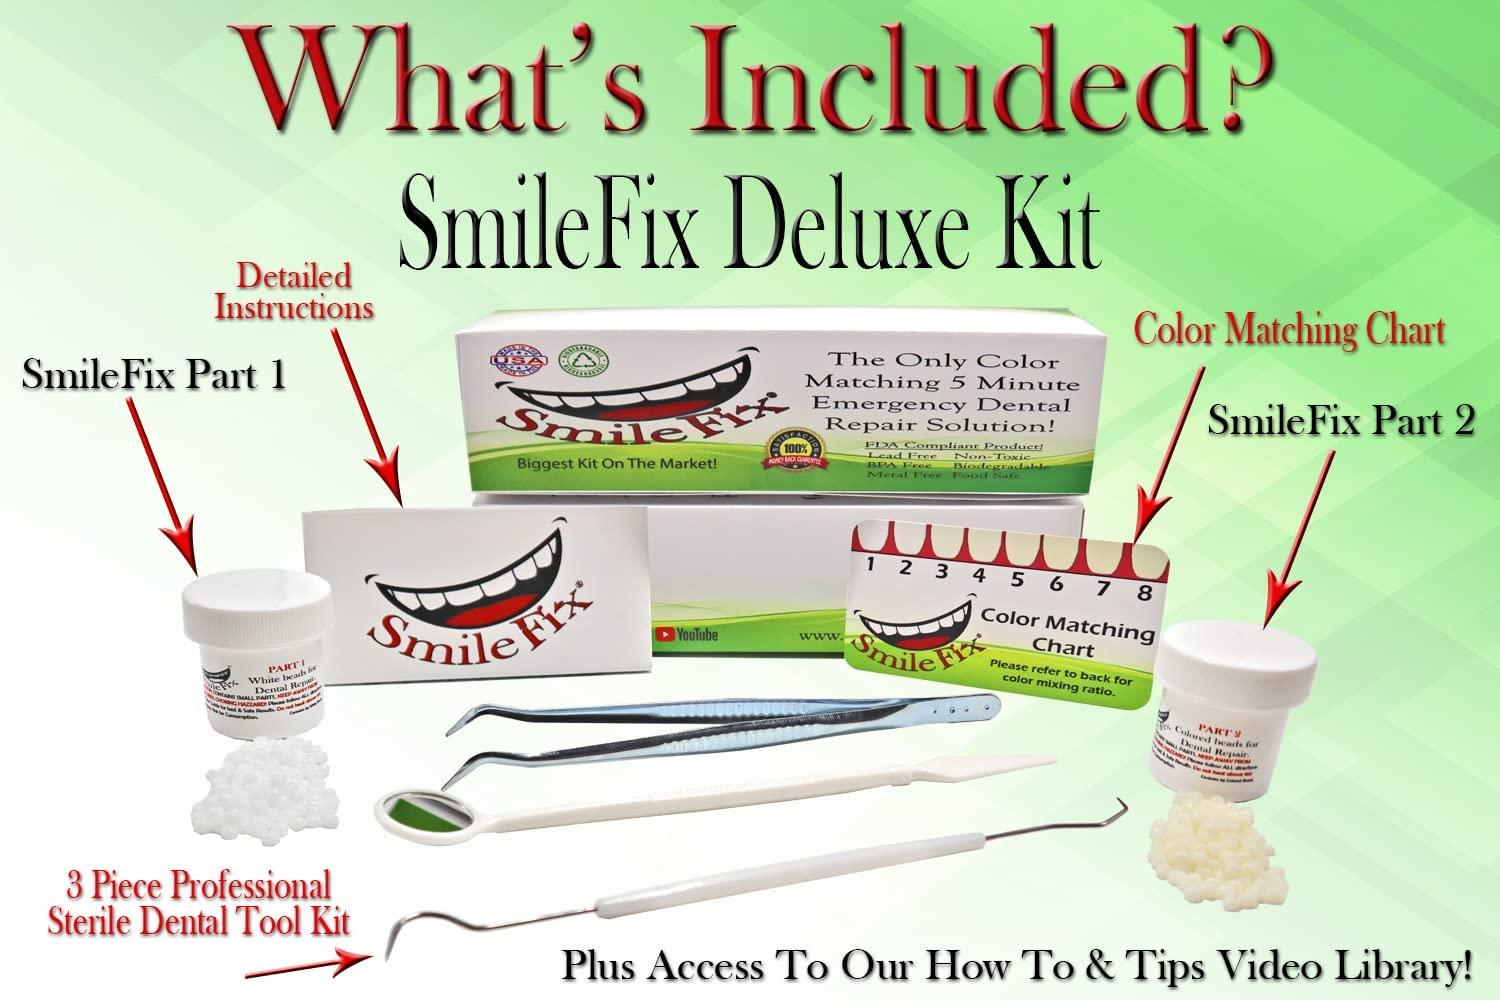 Safe and Sound Temporary Tooth Filling Kit